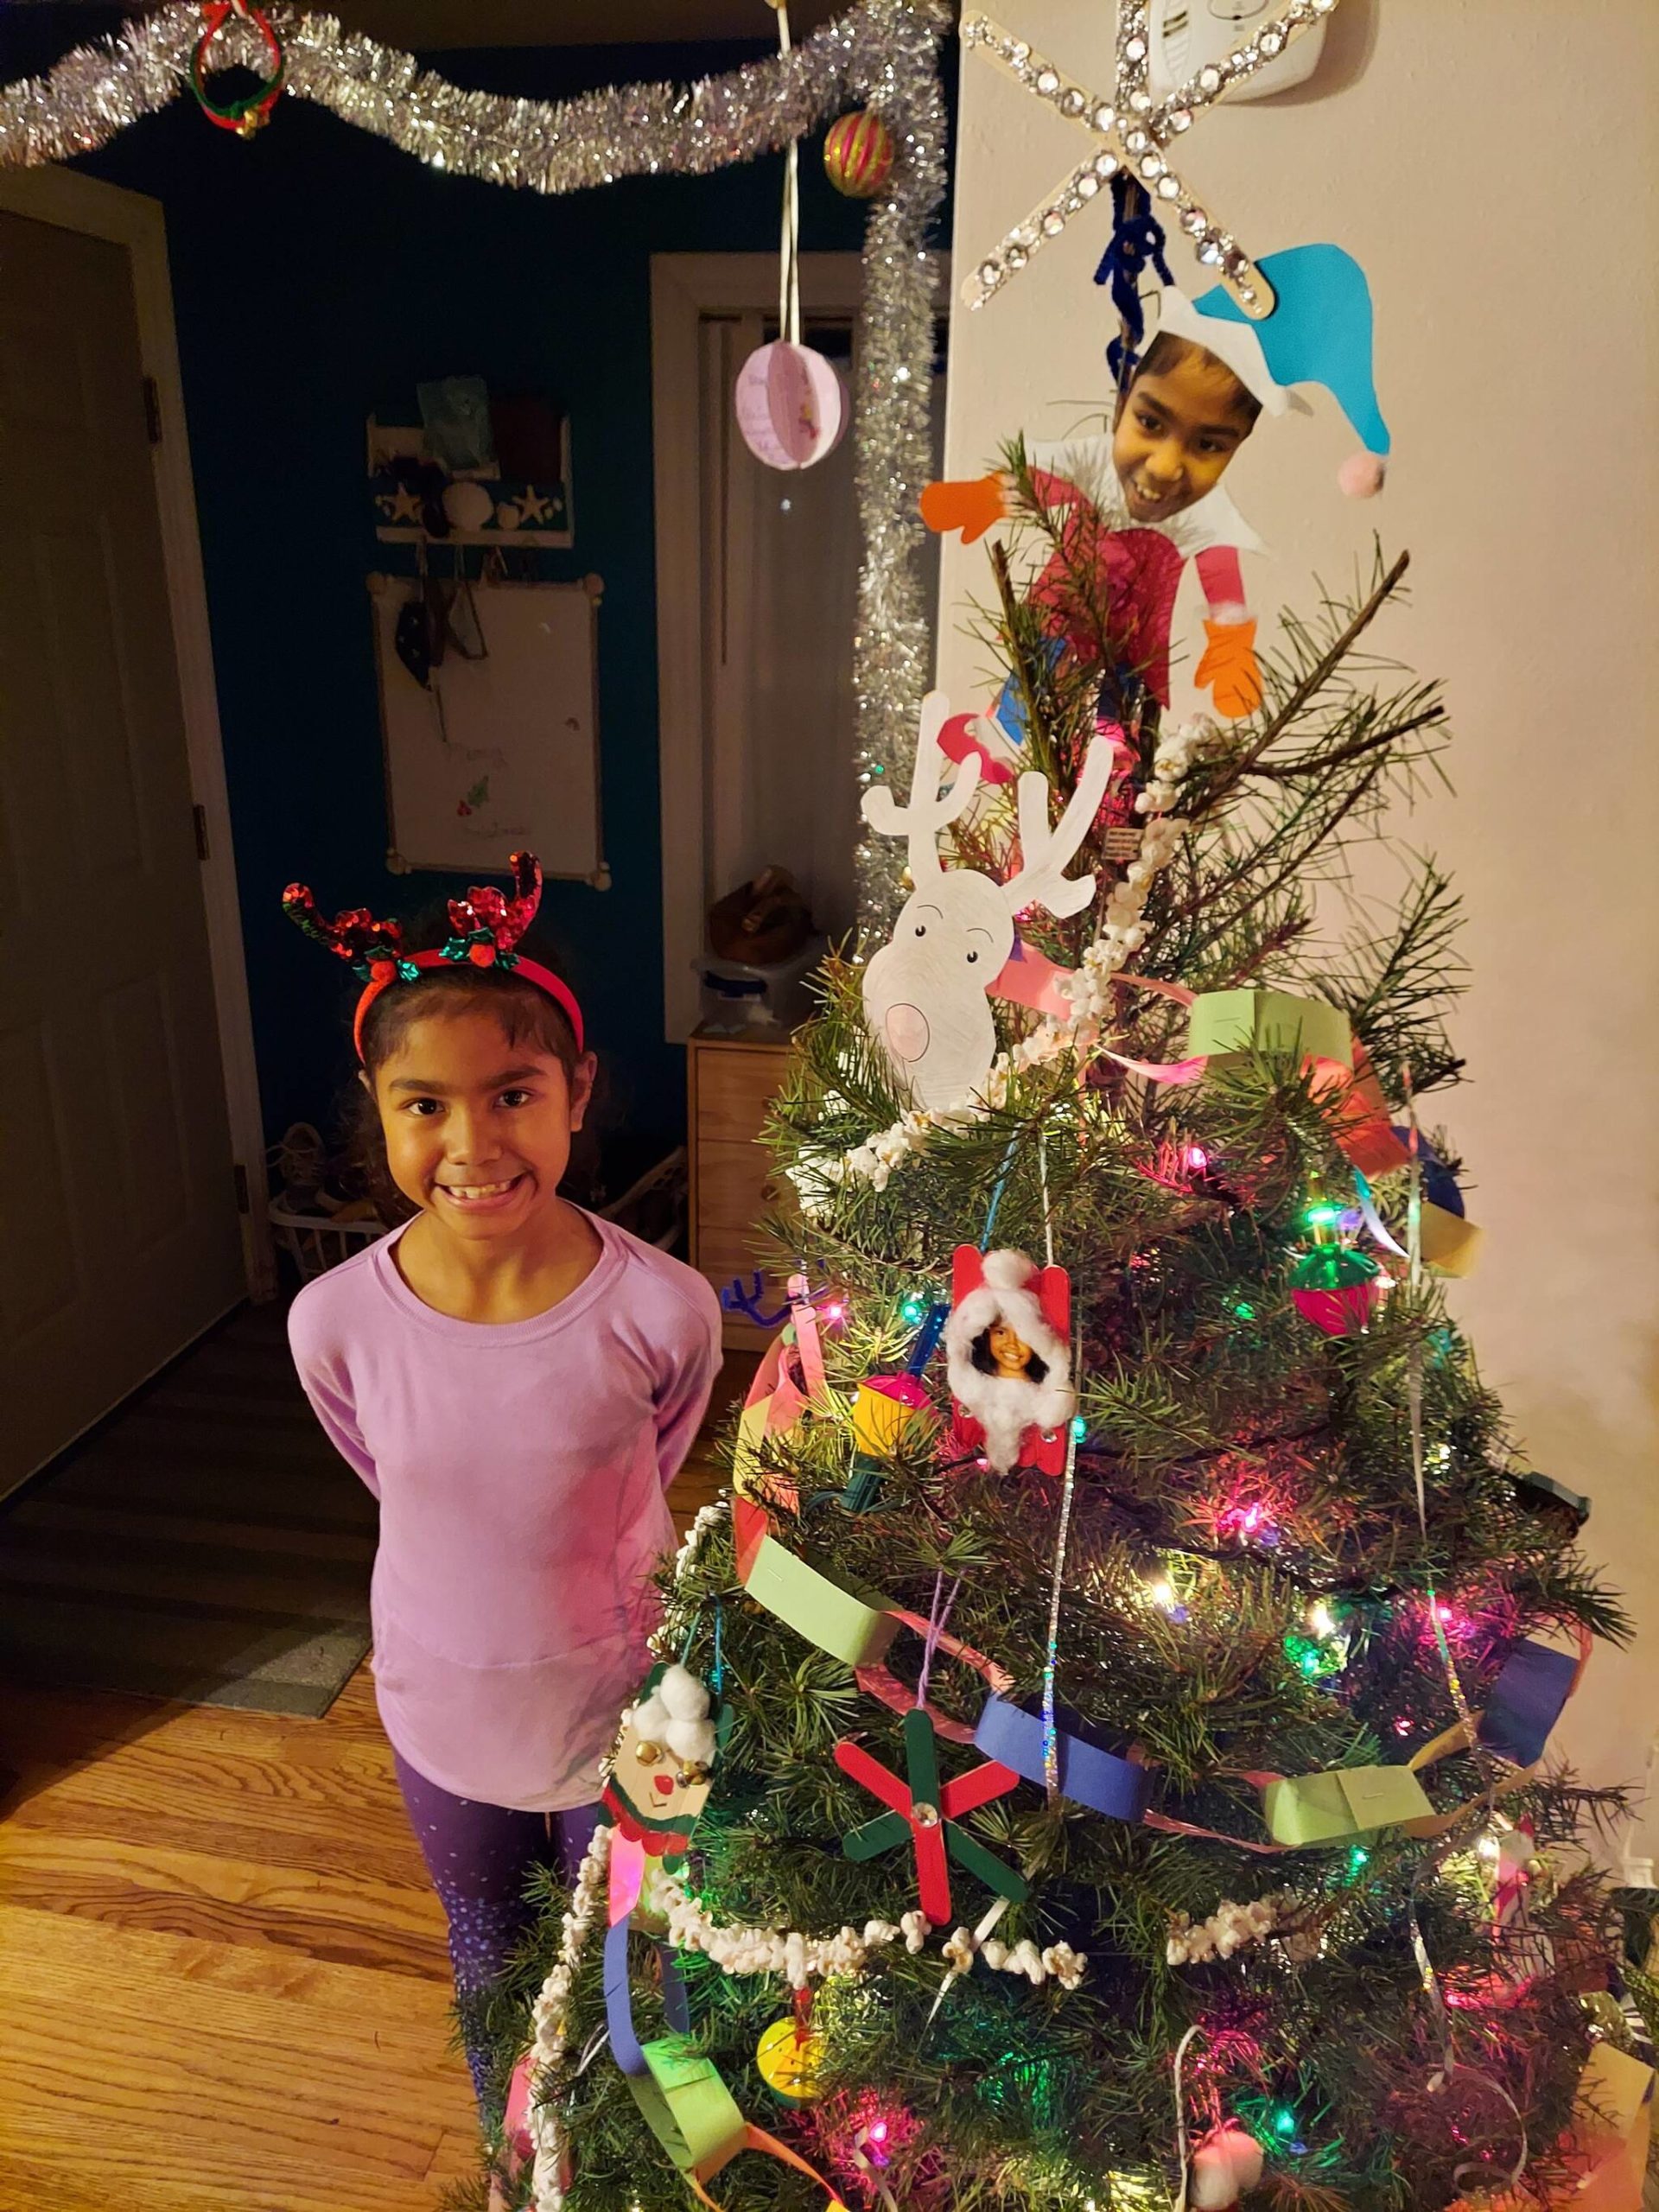 The finished tree …with the especially cute Elf near the top!